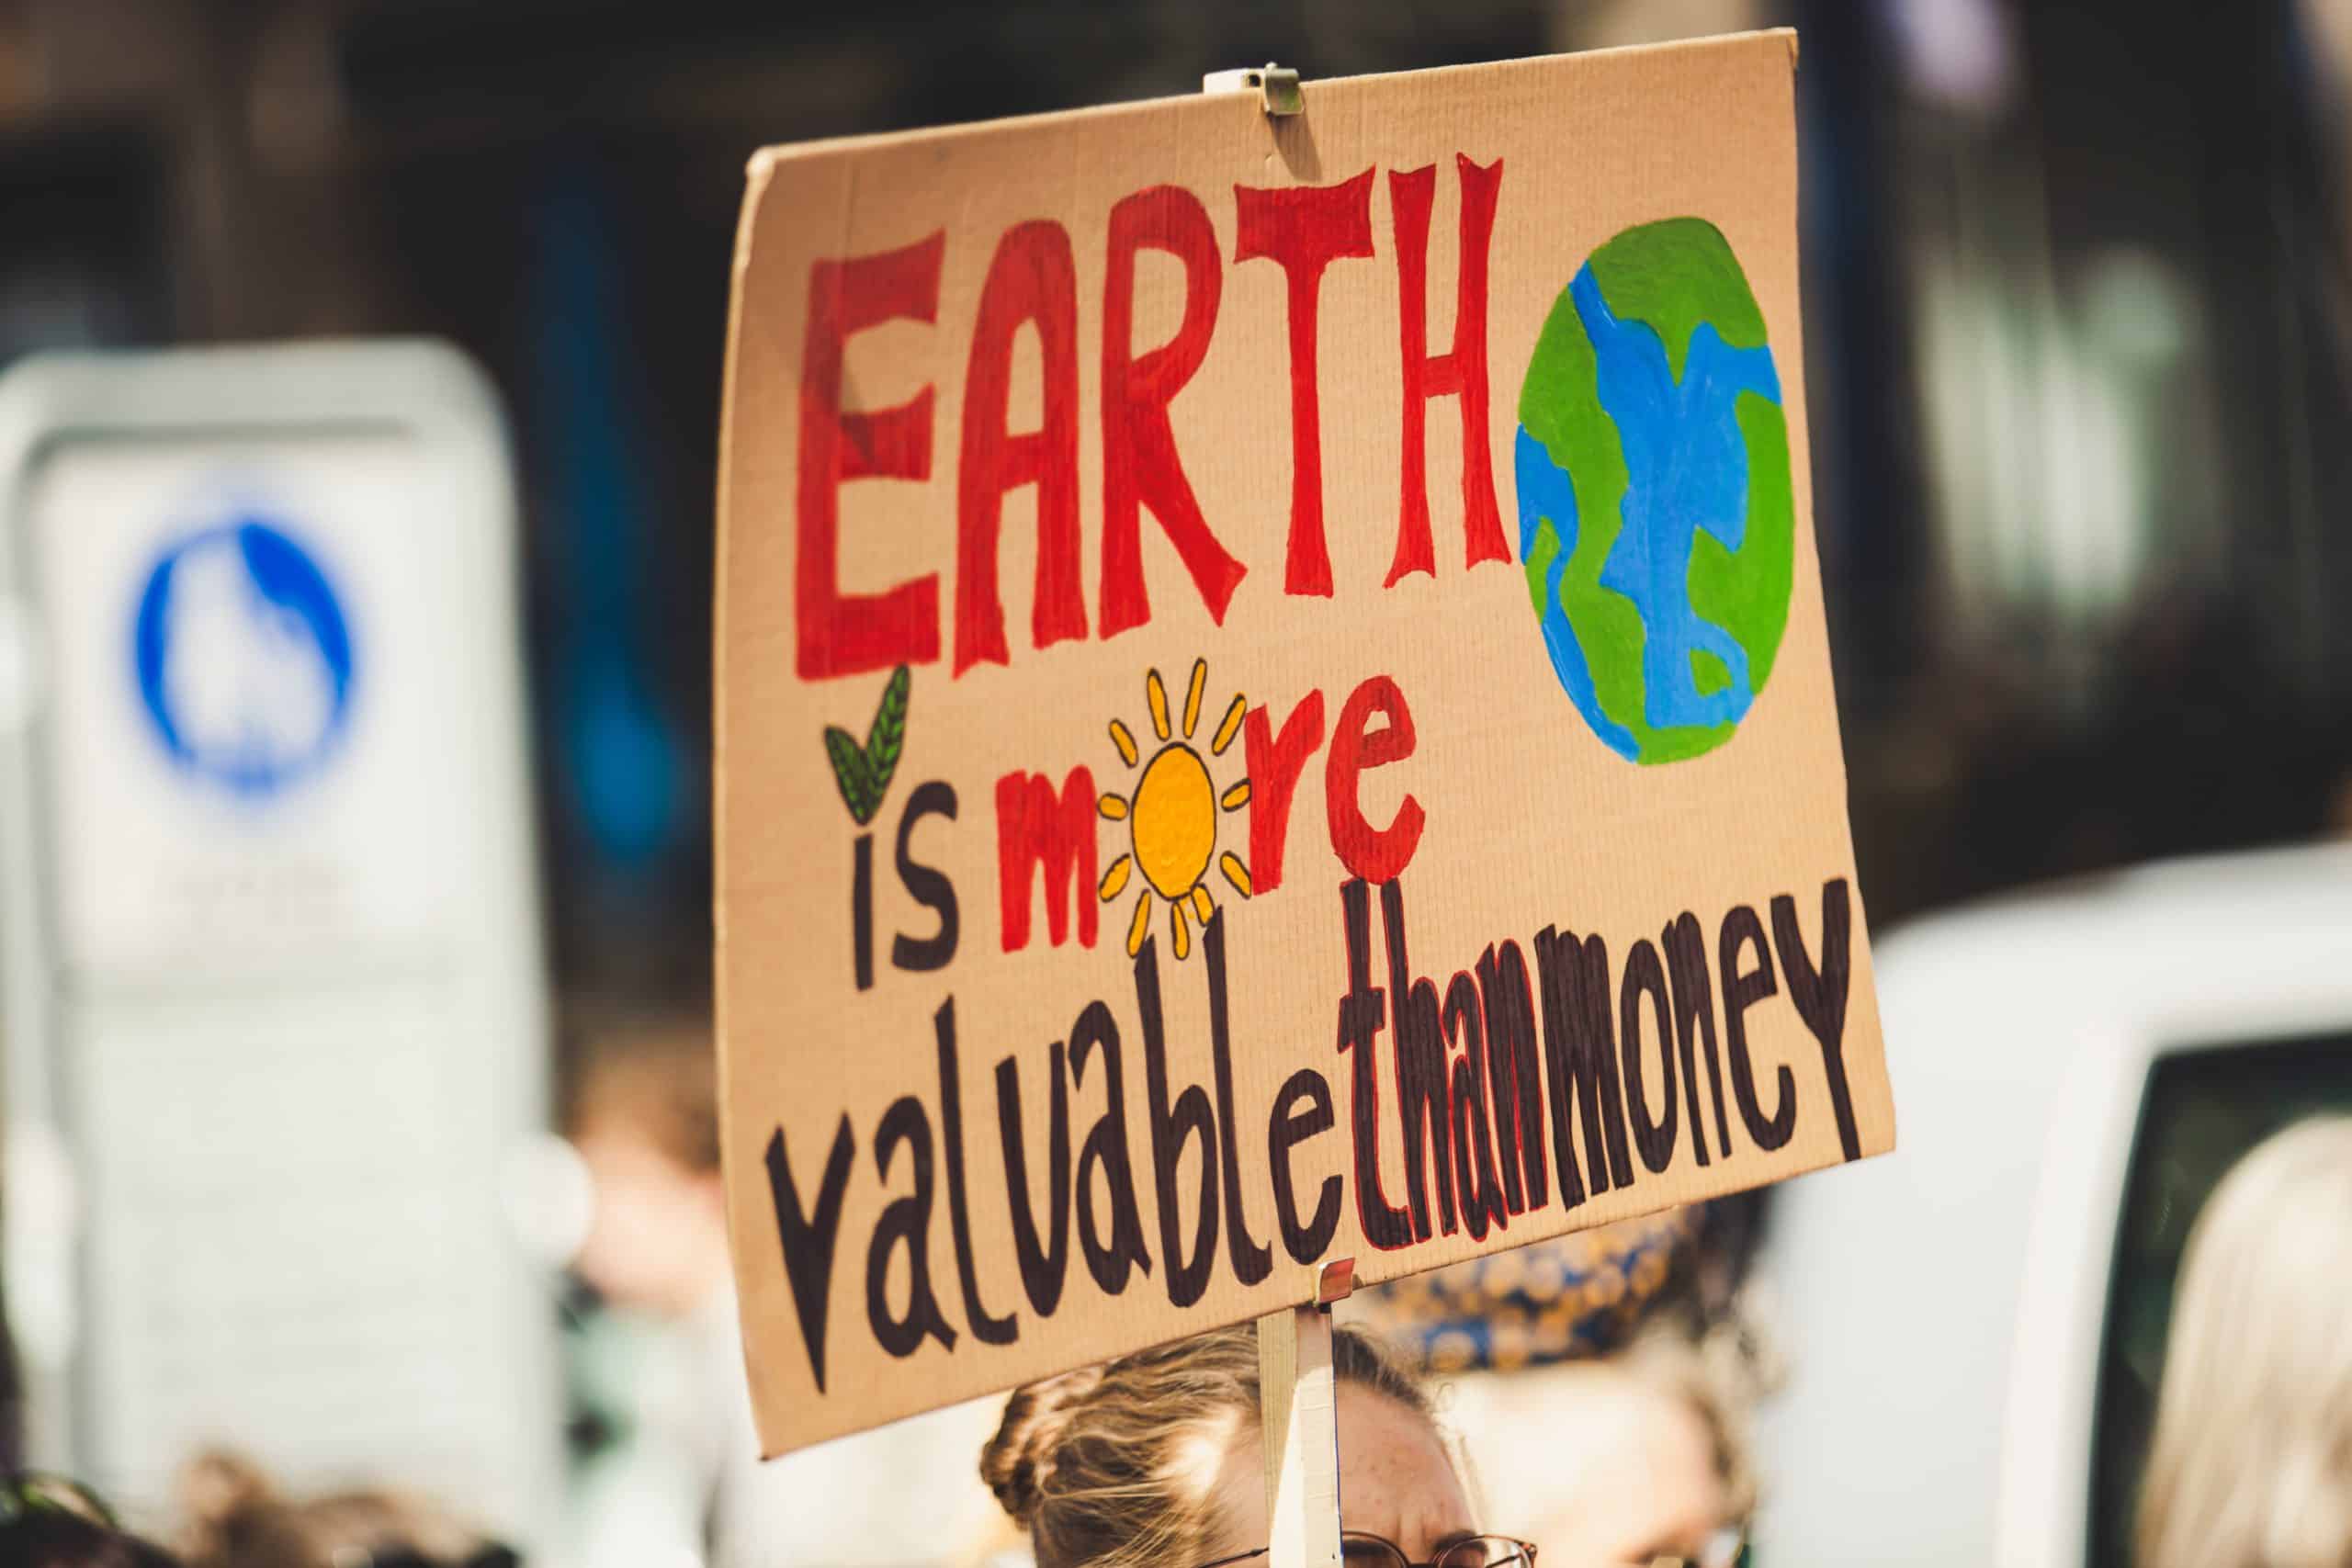 Plackard with "earth is more valuable than money" written on it